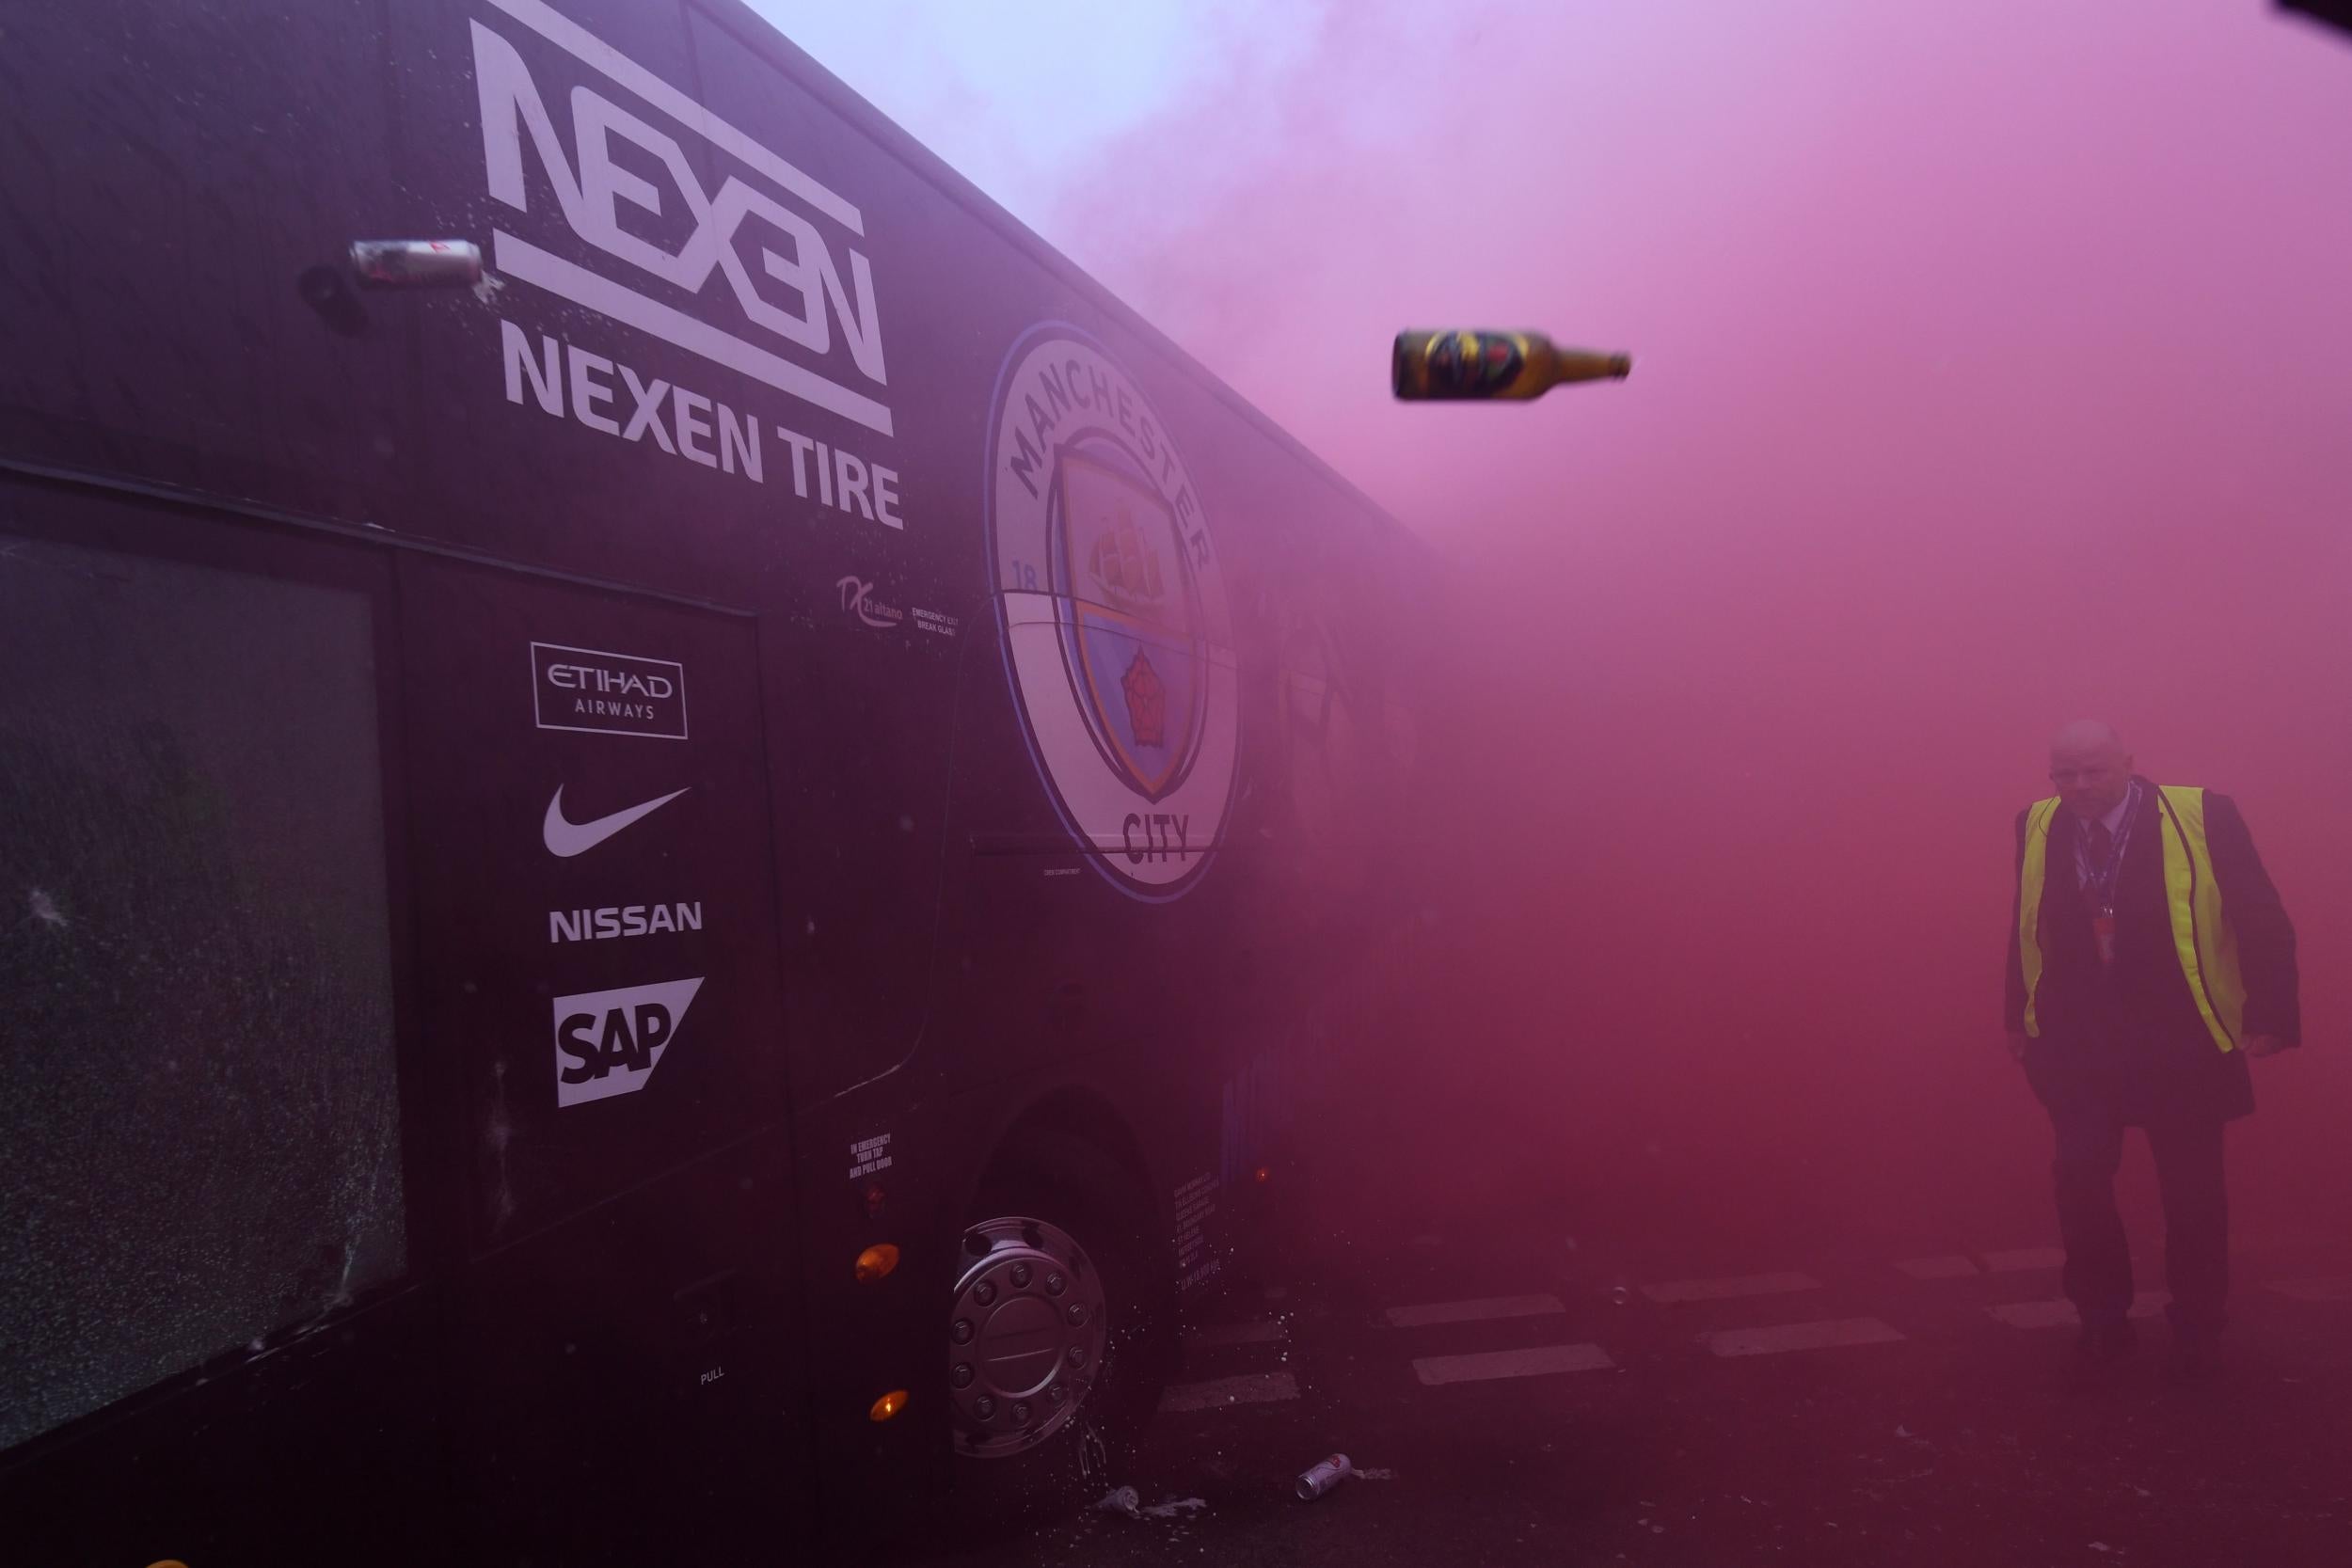 Manchester City's bus was attacked by Liverpool fans outside Anfield